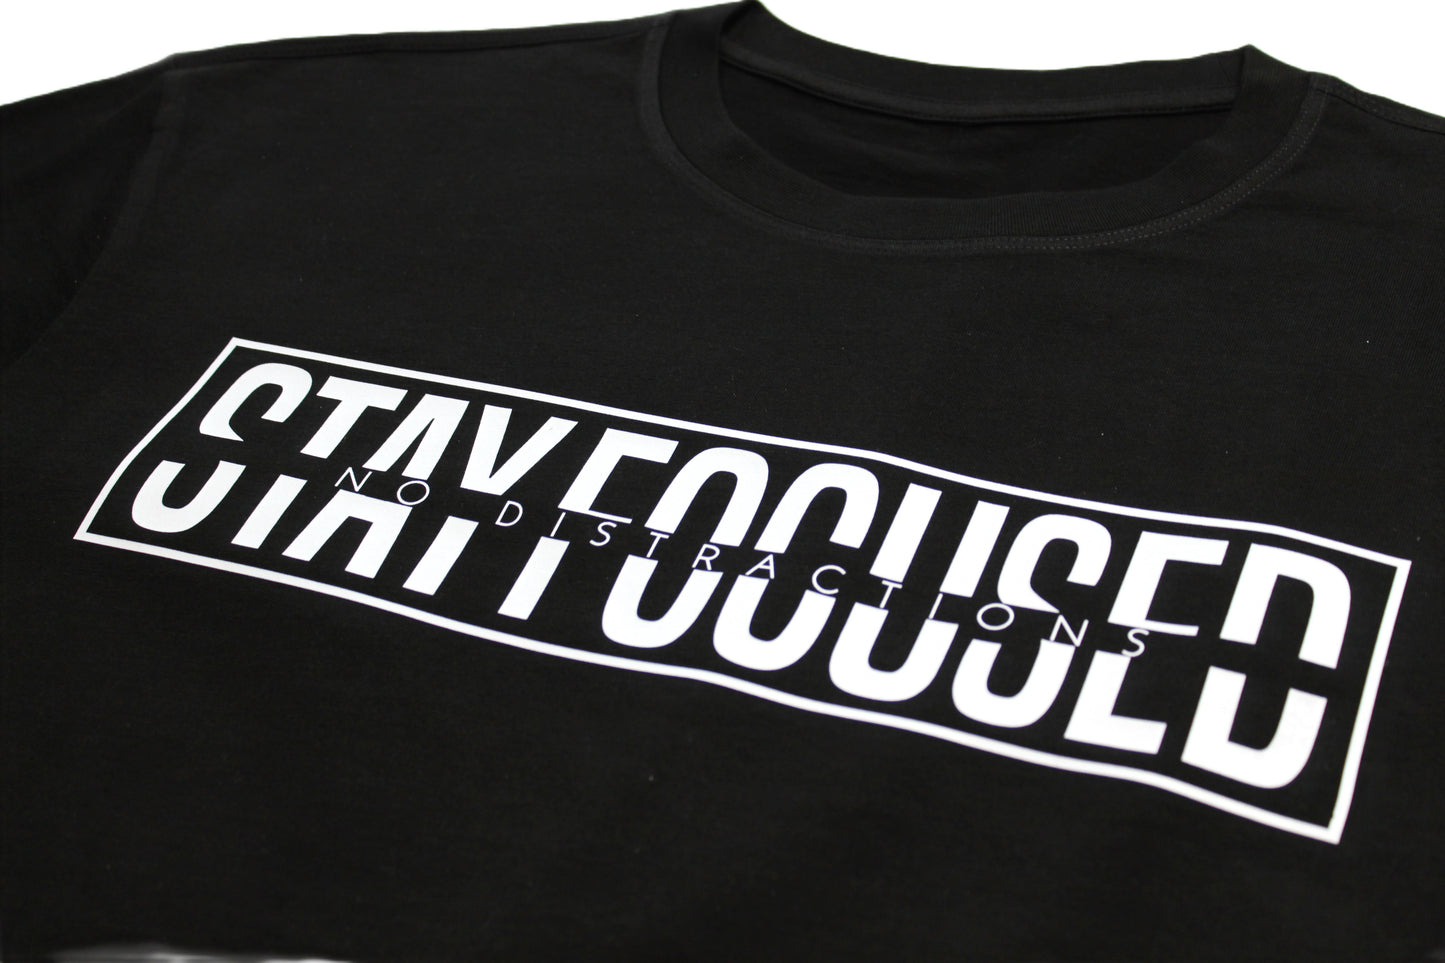 Short Sleeve 'Stay Focused No Distractions' Cotton T-Shirt - Black